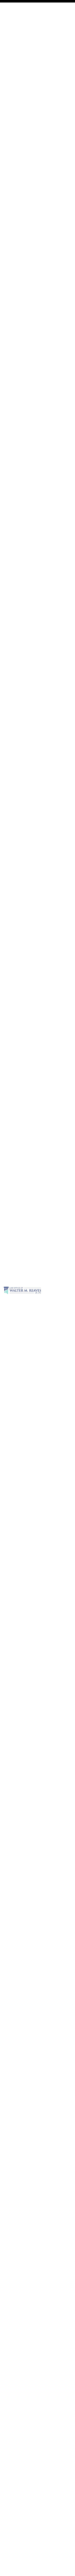 Walter M. Reaves, Jr. - West TX Lawyers